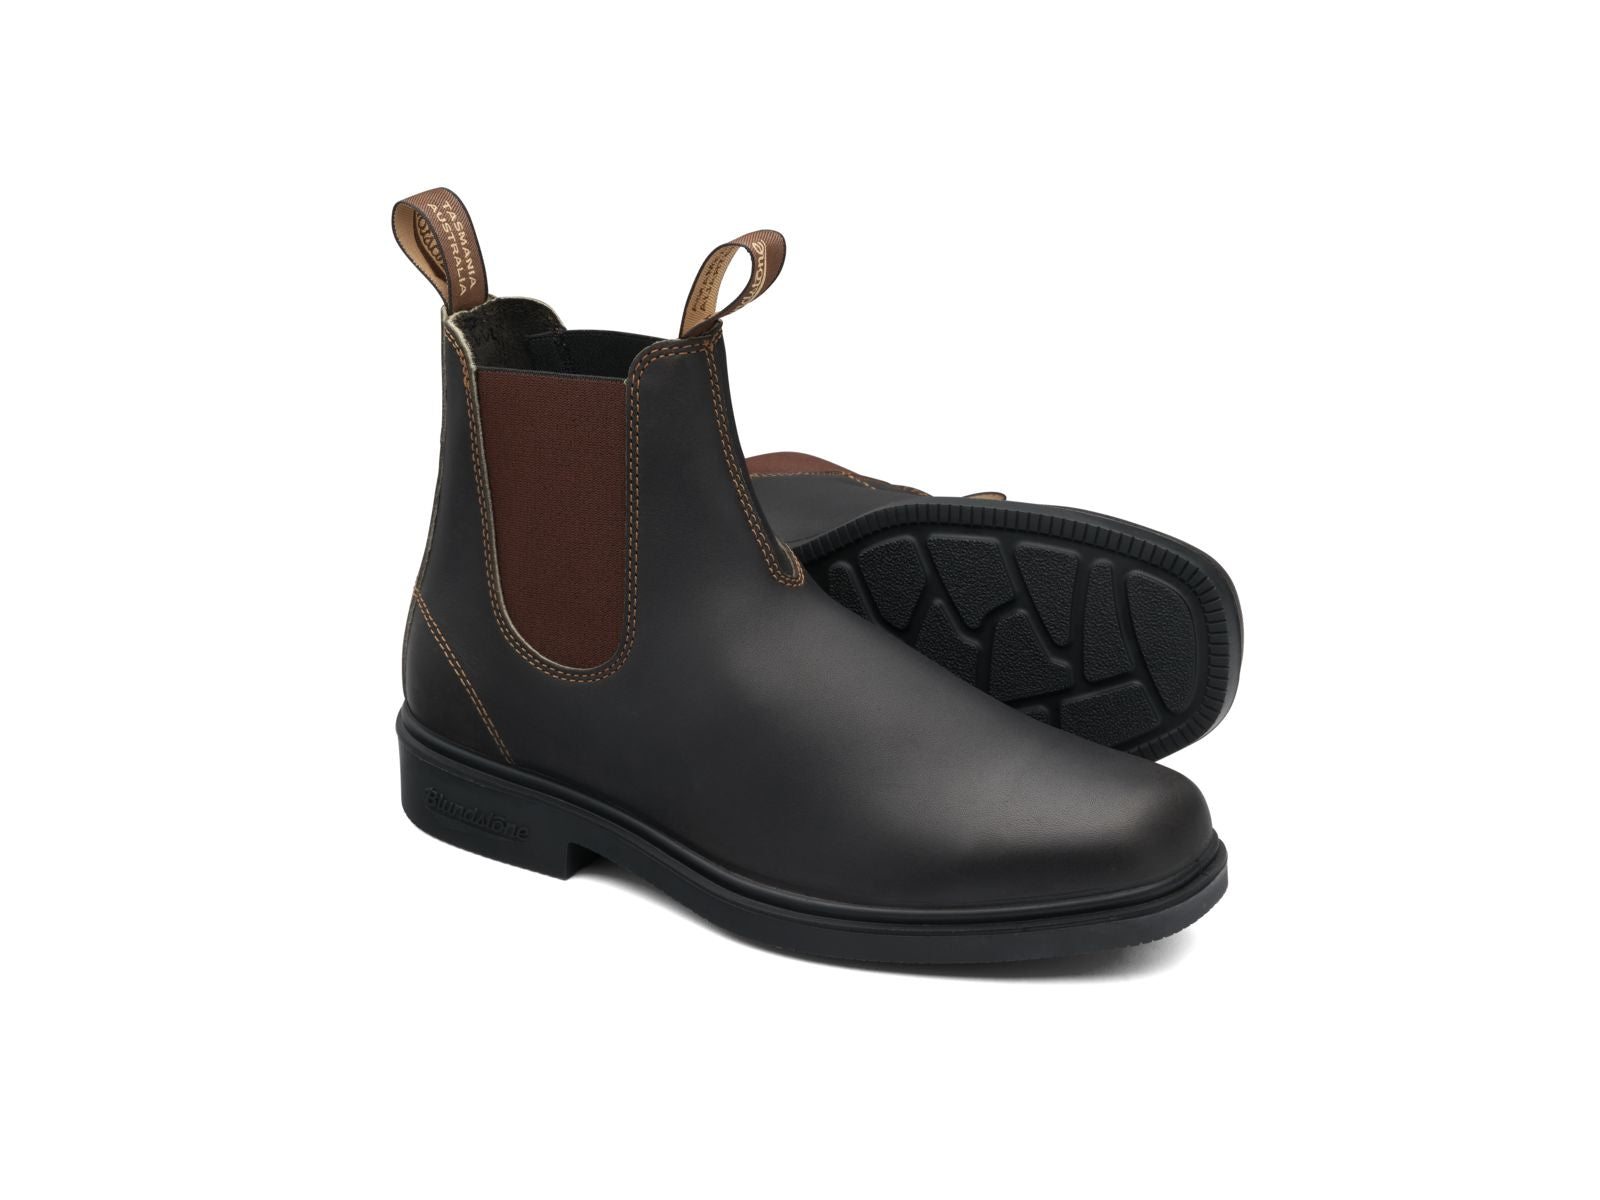 Blundstone 067 Chisel Toe Stout Brown